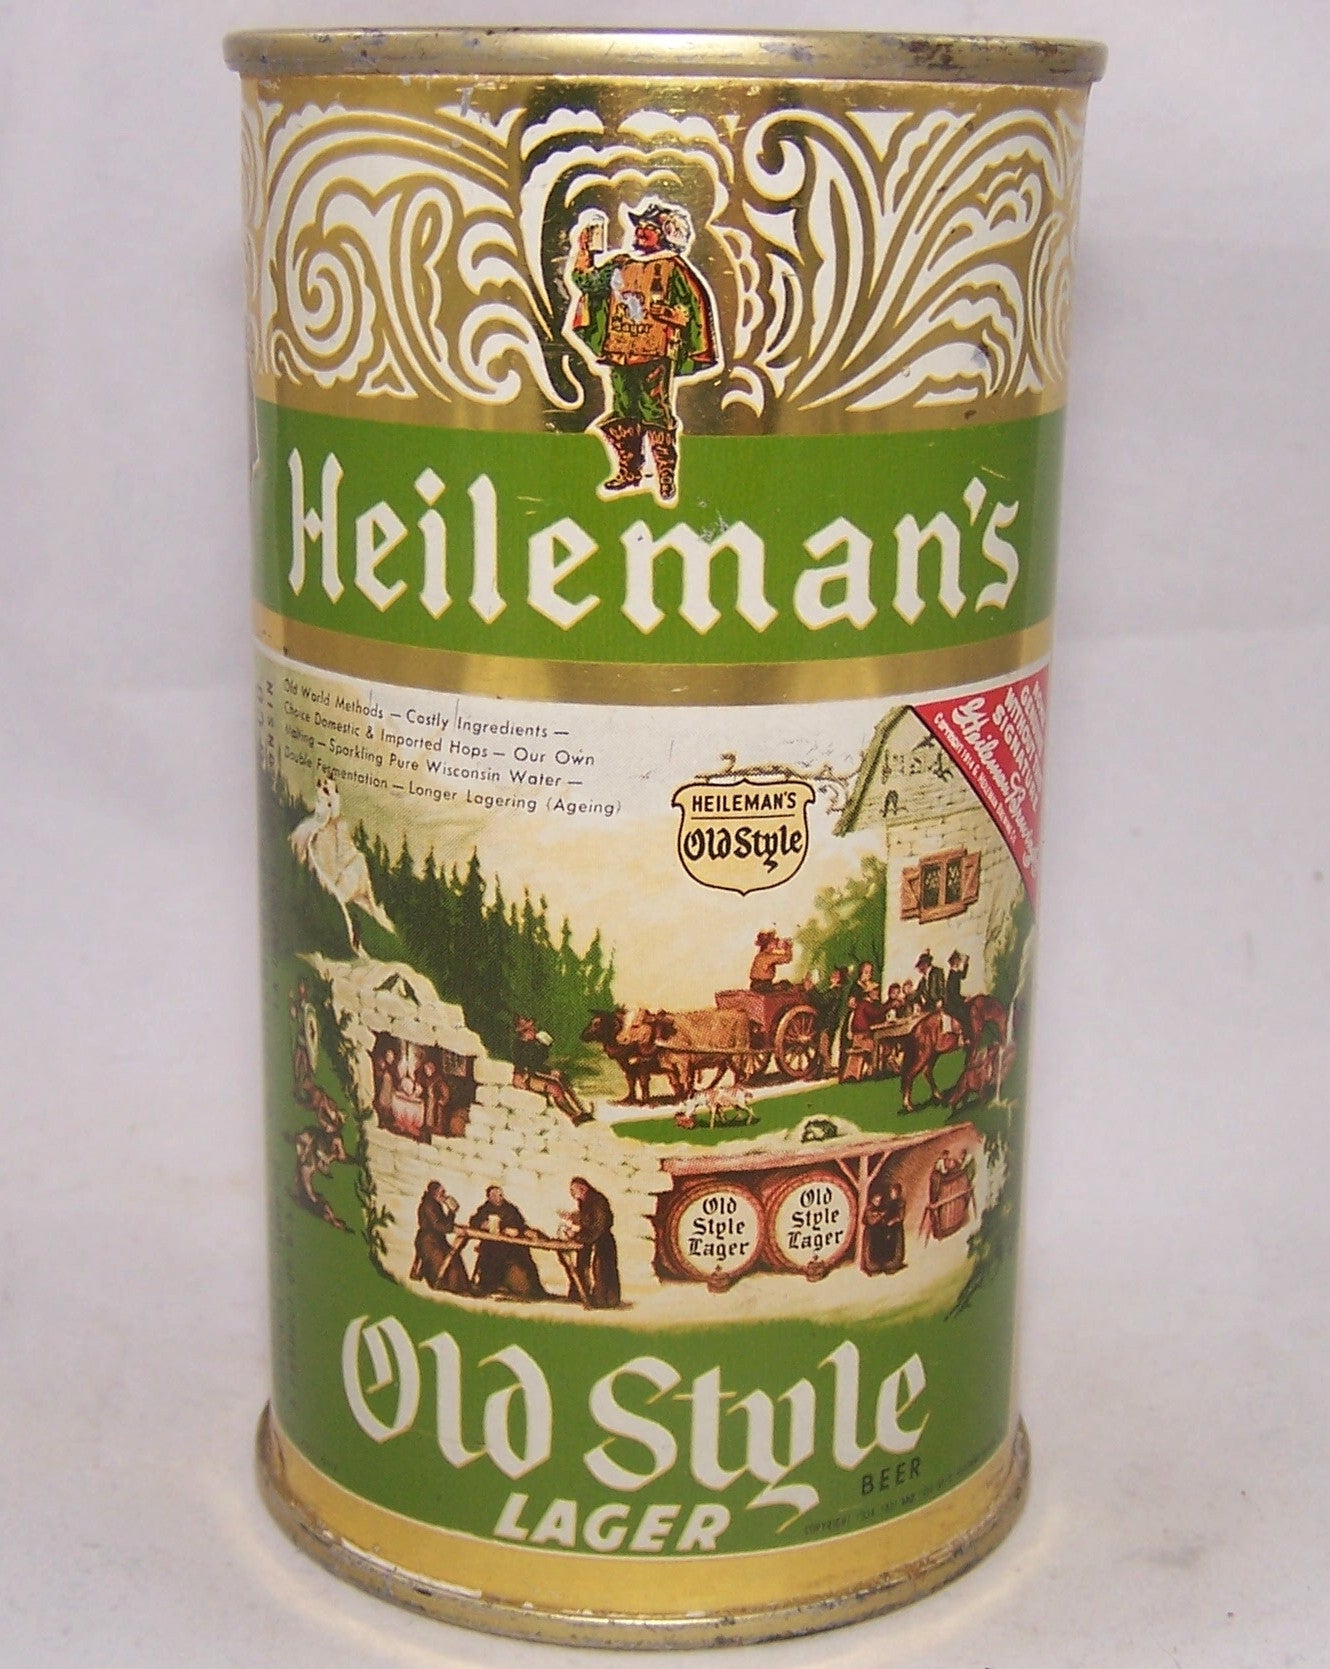 Heileman's Old Style Lager, USBC 108-14. Grade A1+ Sold on 01/14/17